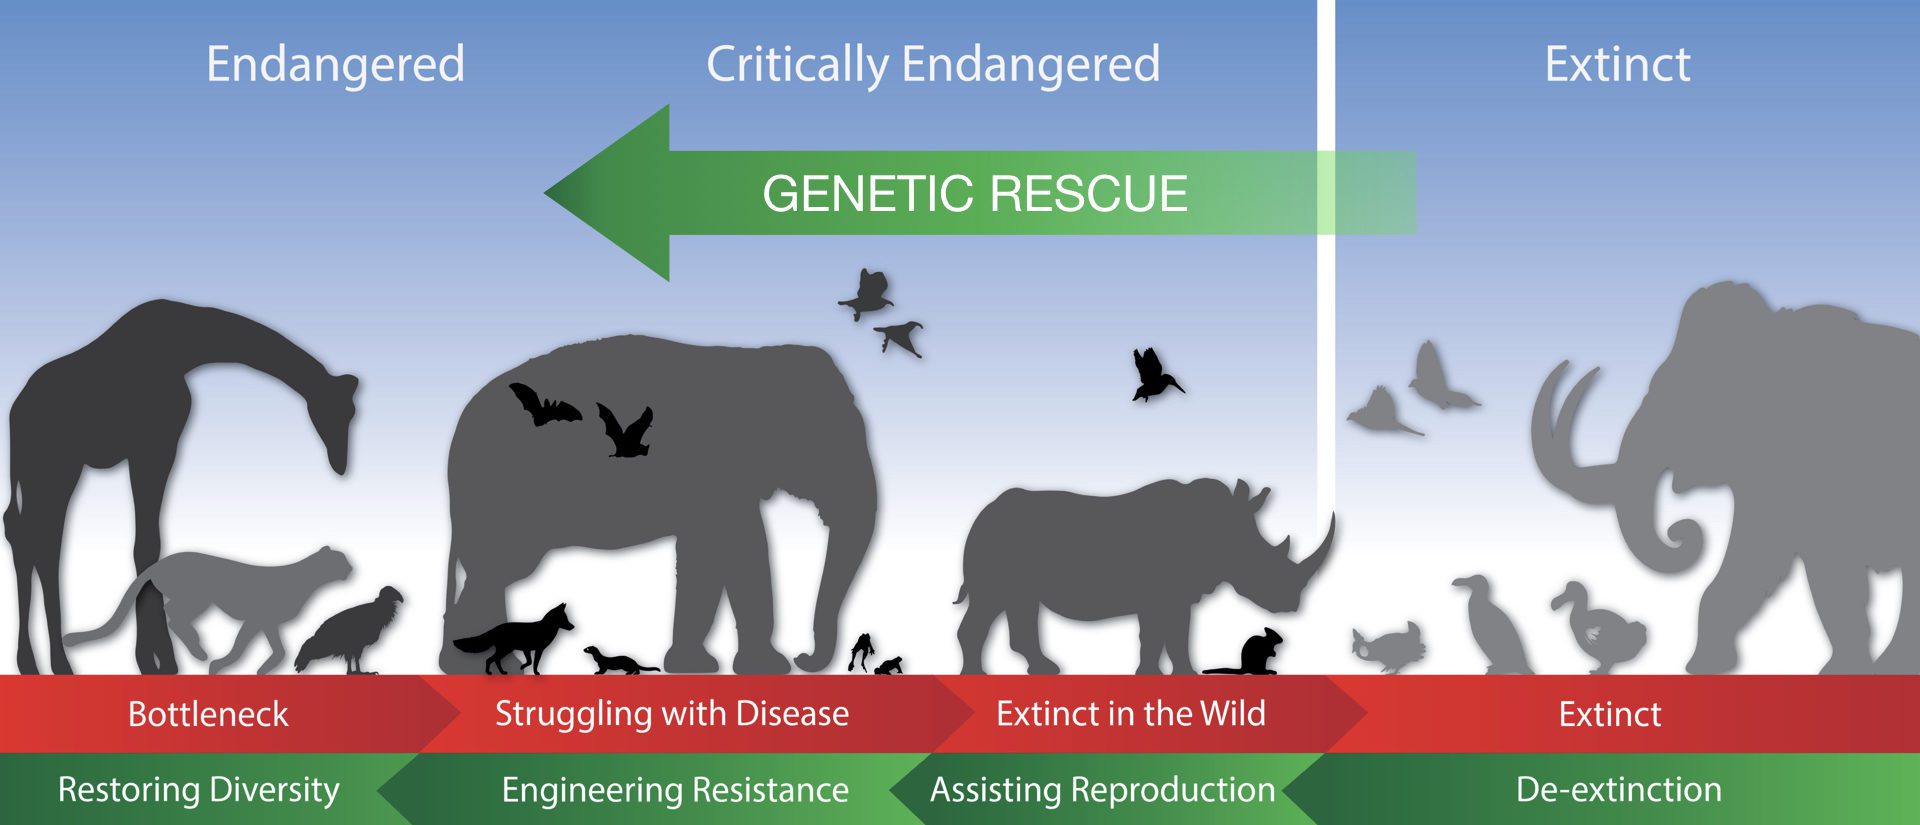 5 Biotechnologies That Might Help Save Endangered Species - Revive & Restore